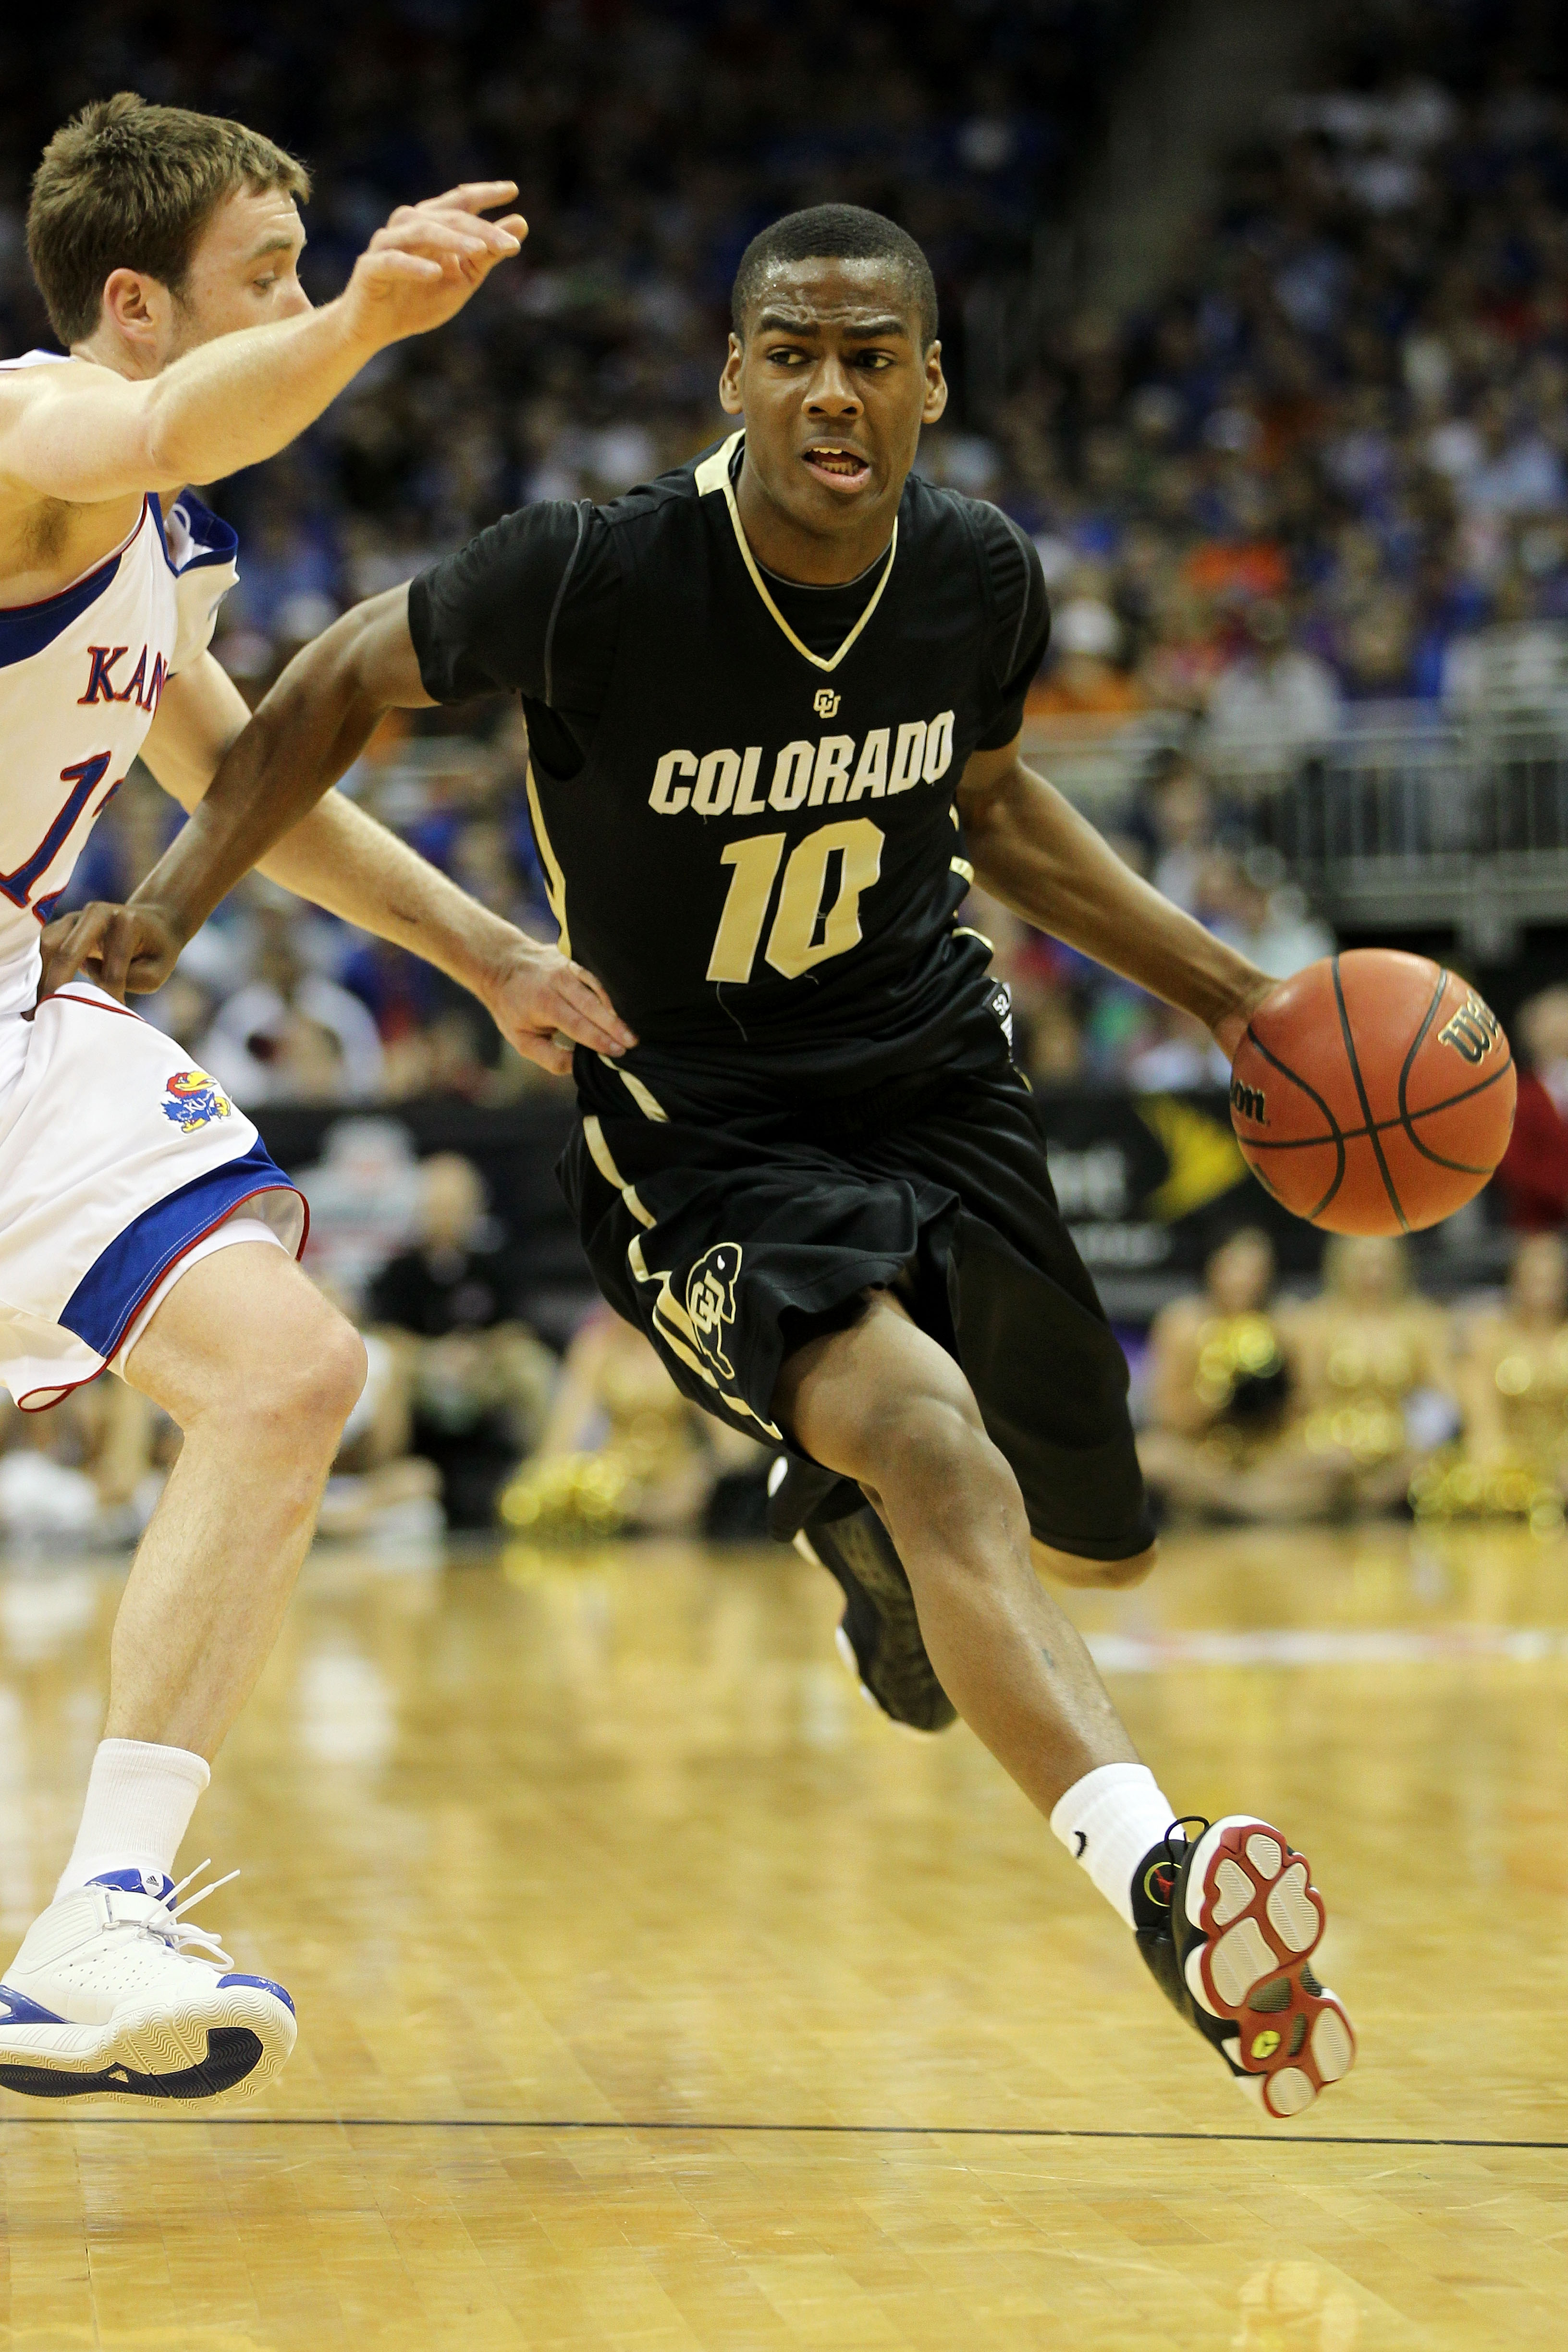 KANSAS CITY, MO - MARCH 11:  Alec Burks #10 of the Colorado Buffaloes drives with the ball against the Kansas Jayhawks during their semifinal game in the 2011 Phillips 66 Big 12 Men's Basketball Tournament at Sprint Center on March 11, 2011 in Kansas City